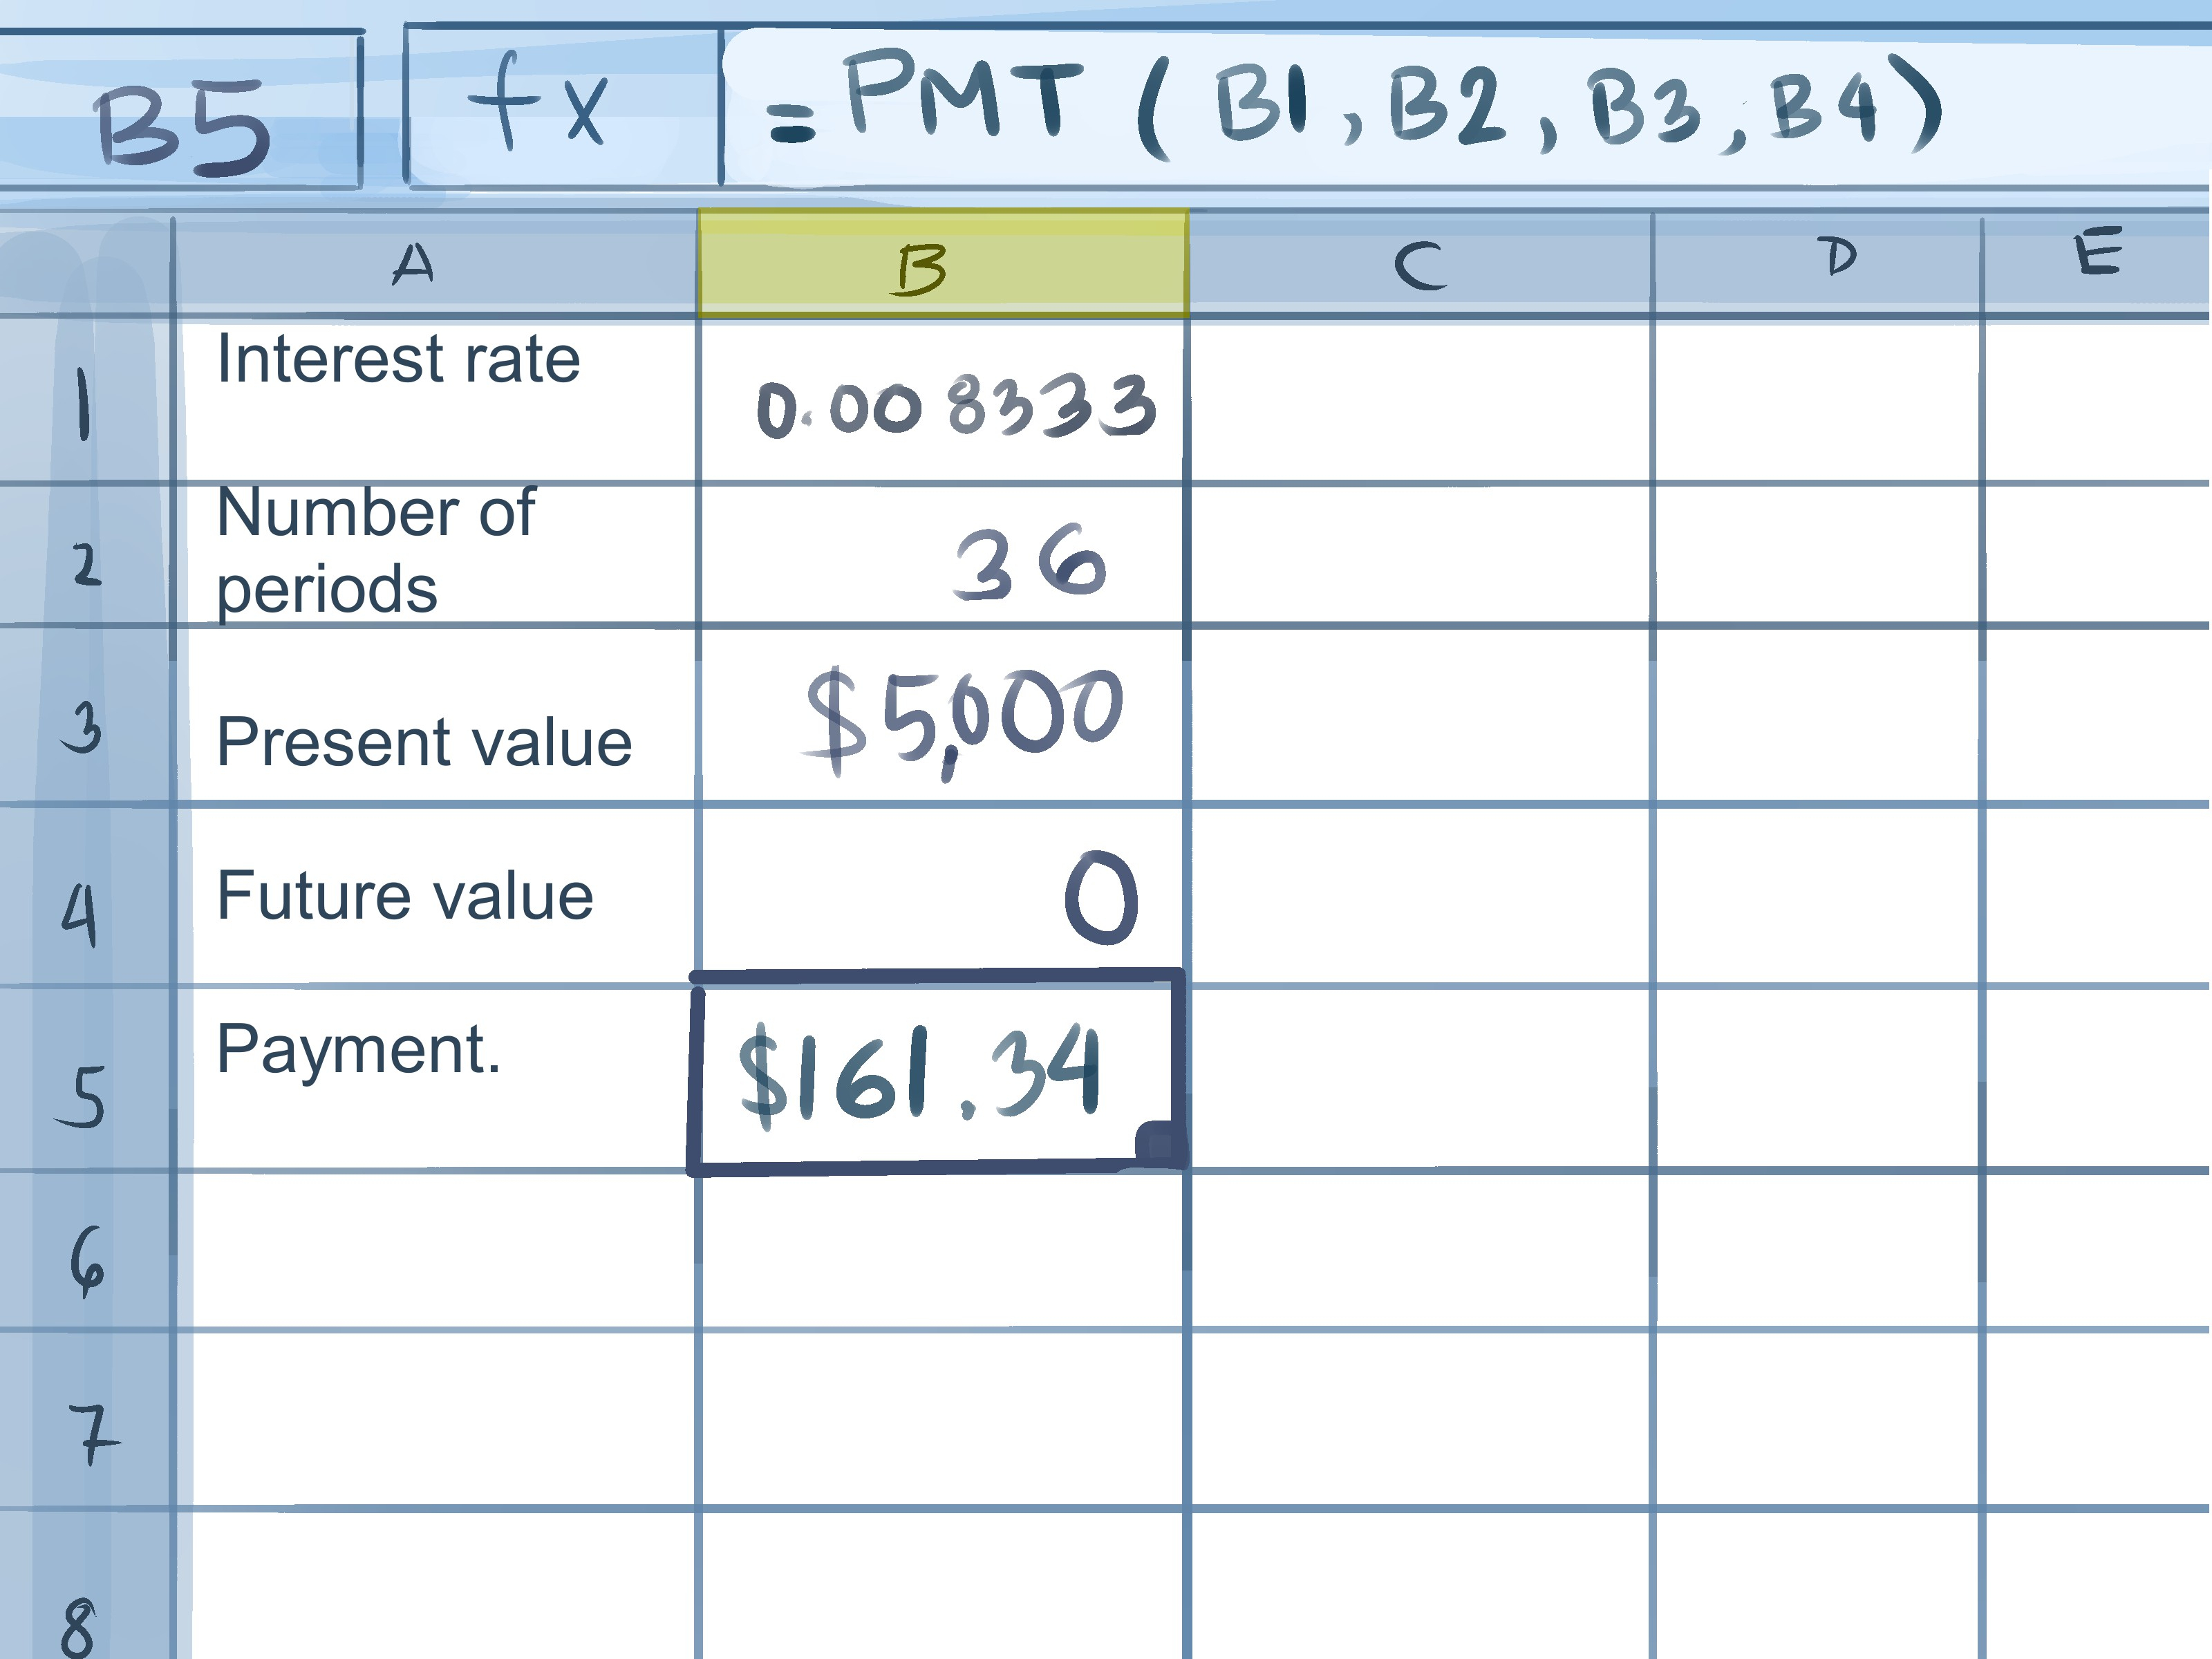 Credit Card Repayment Calculator Spreadsheet Regarding How To Calculate Credit Card Payments In Excel: 10 Steps